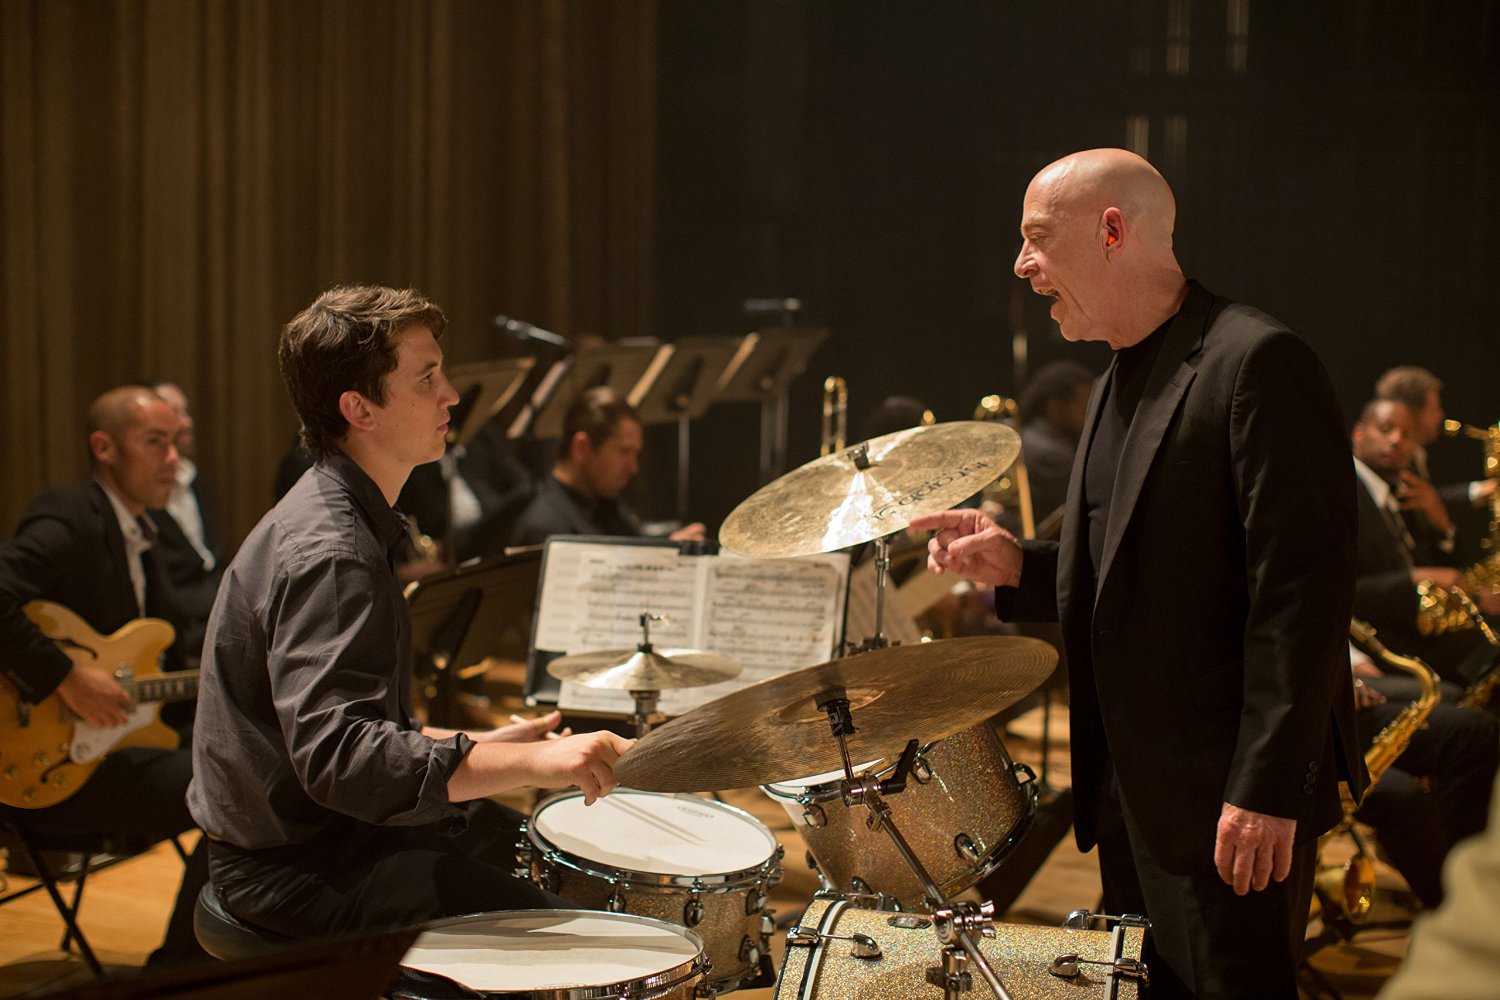 Videophiled: Oscar winners ‘Whiplash’ and ‘Big Hero 6’ on disc and VOD